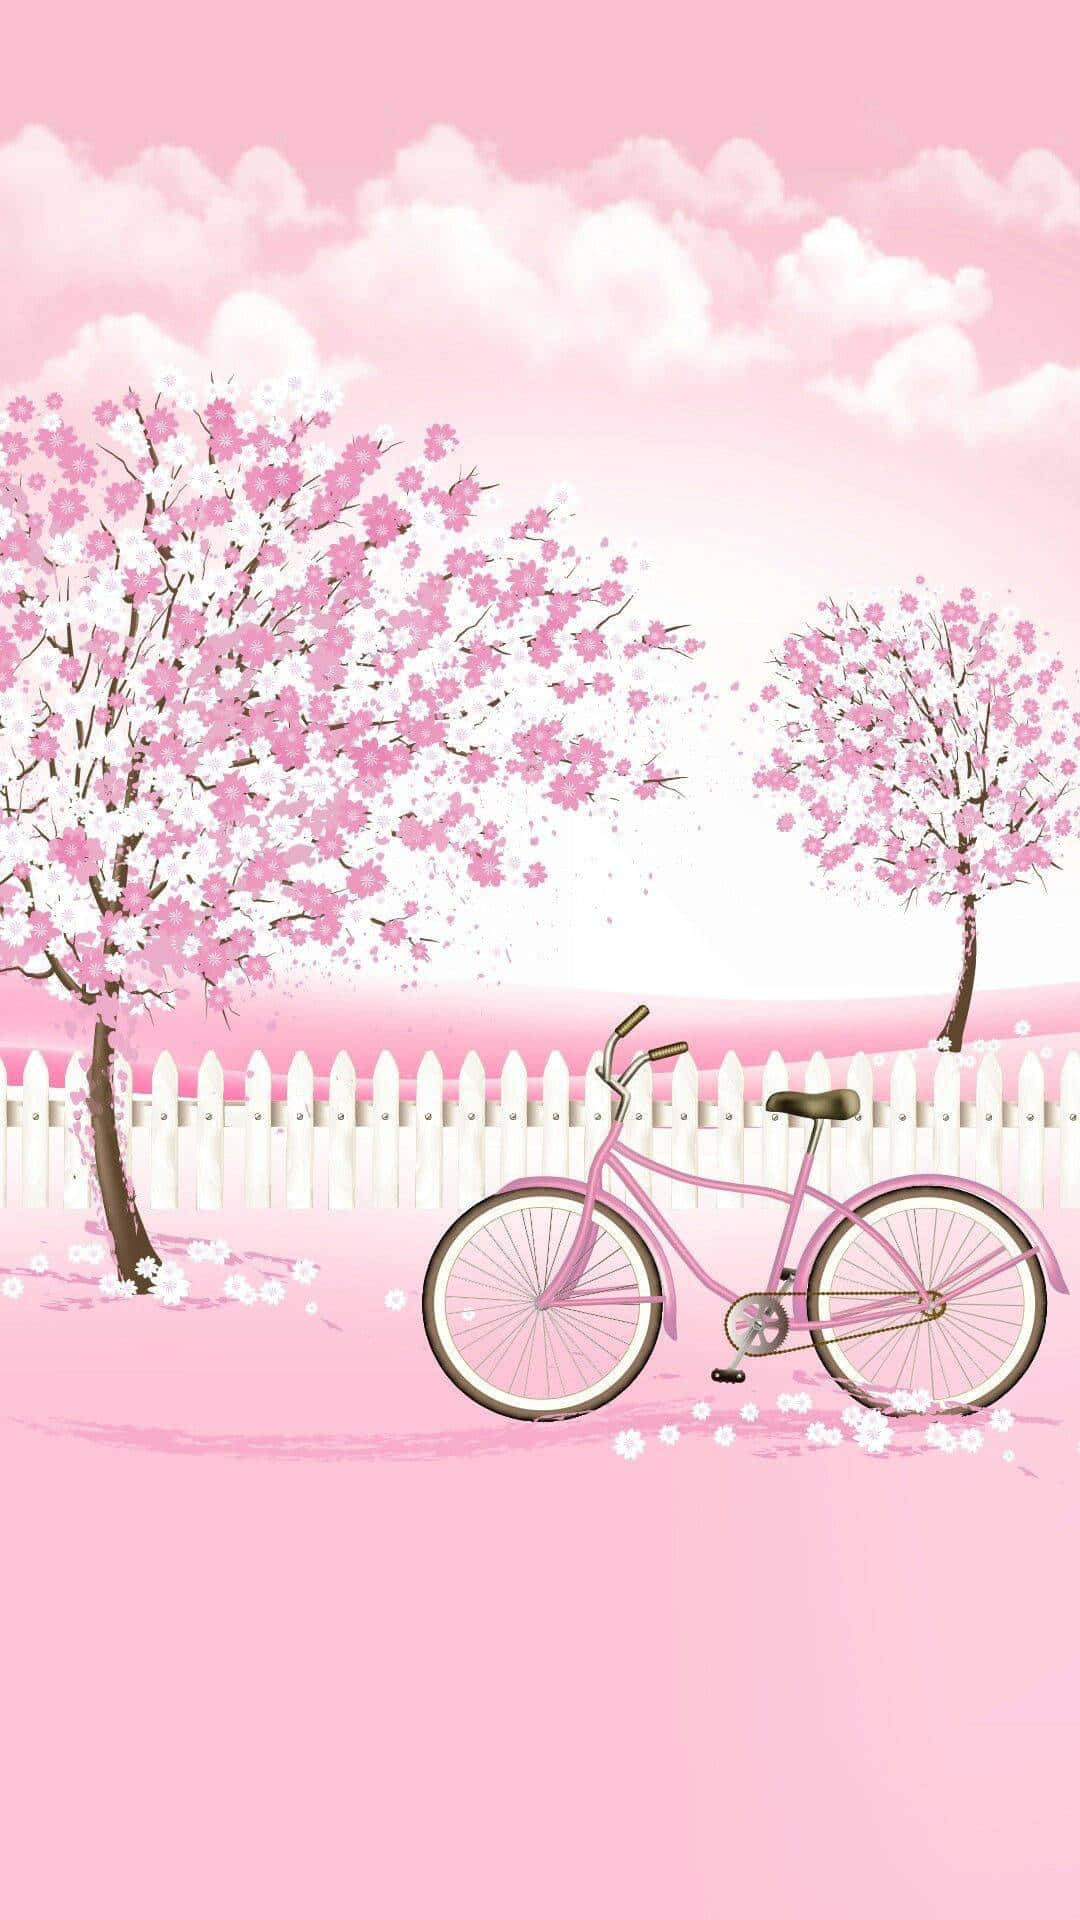 Springtime Bicycle Pink Blossoms Wallpaper